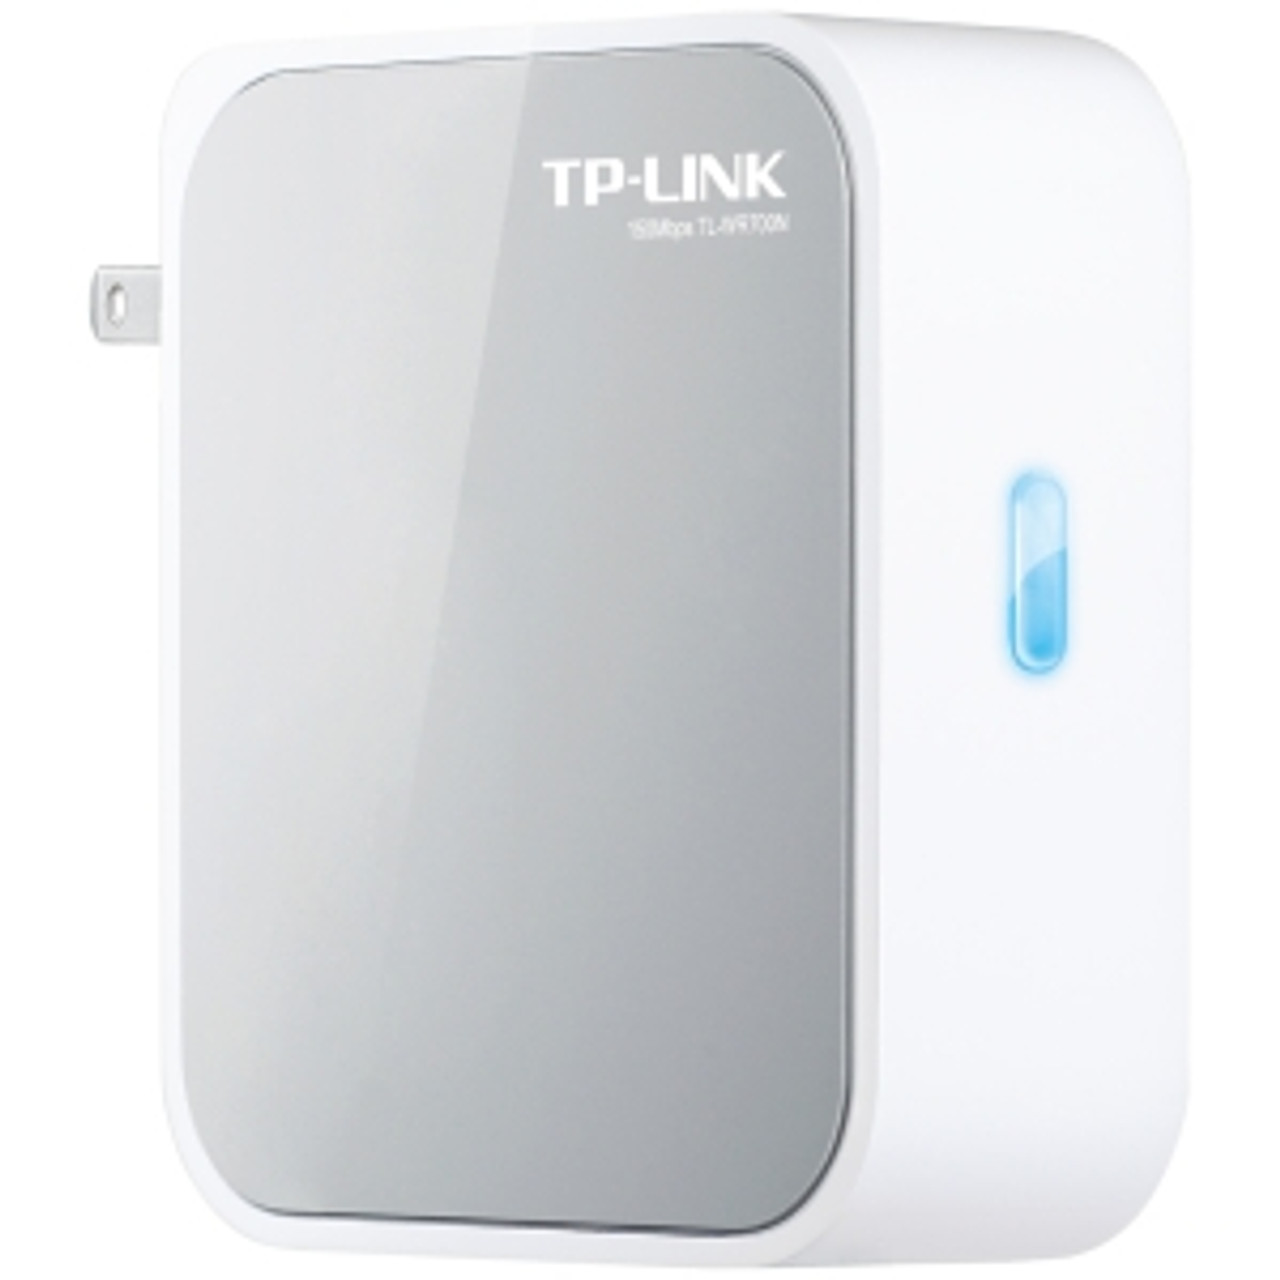 TL-WR700N TP-Link 150Mbps Wireless N Mini Pocket AP Router Atheros 1T1R 2.4GHz 802.11n/g/b Wall-plugged design (US plug integrated) Internal Antenna